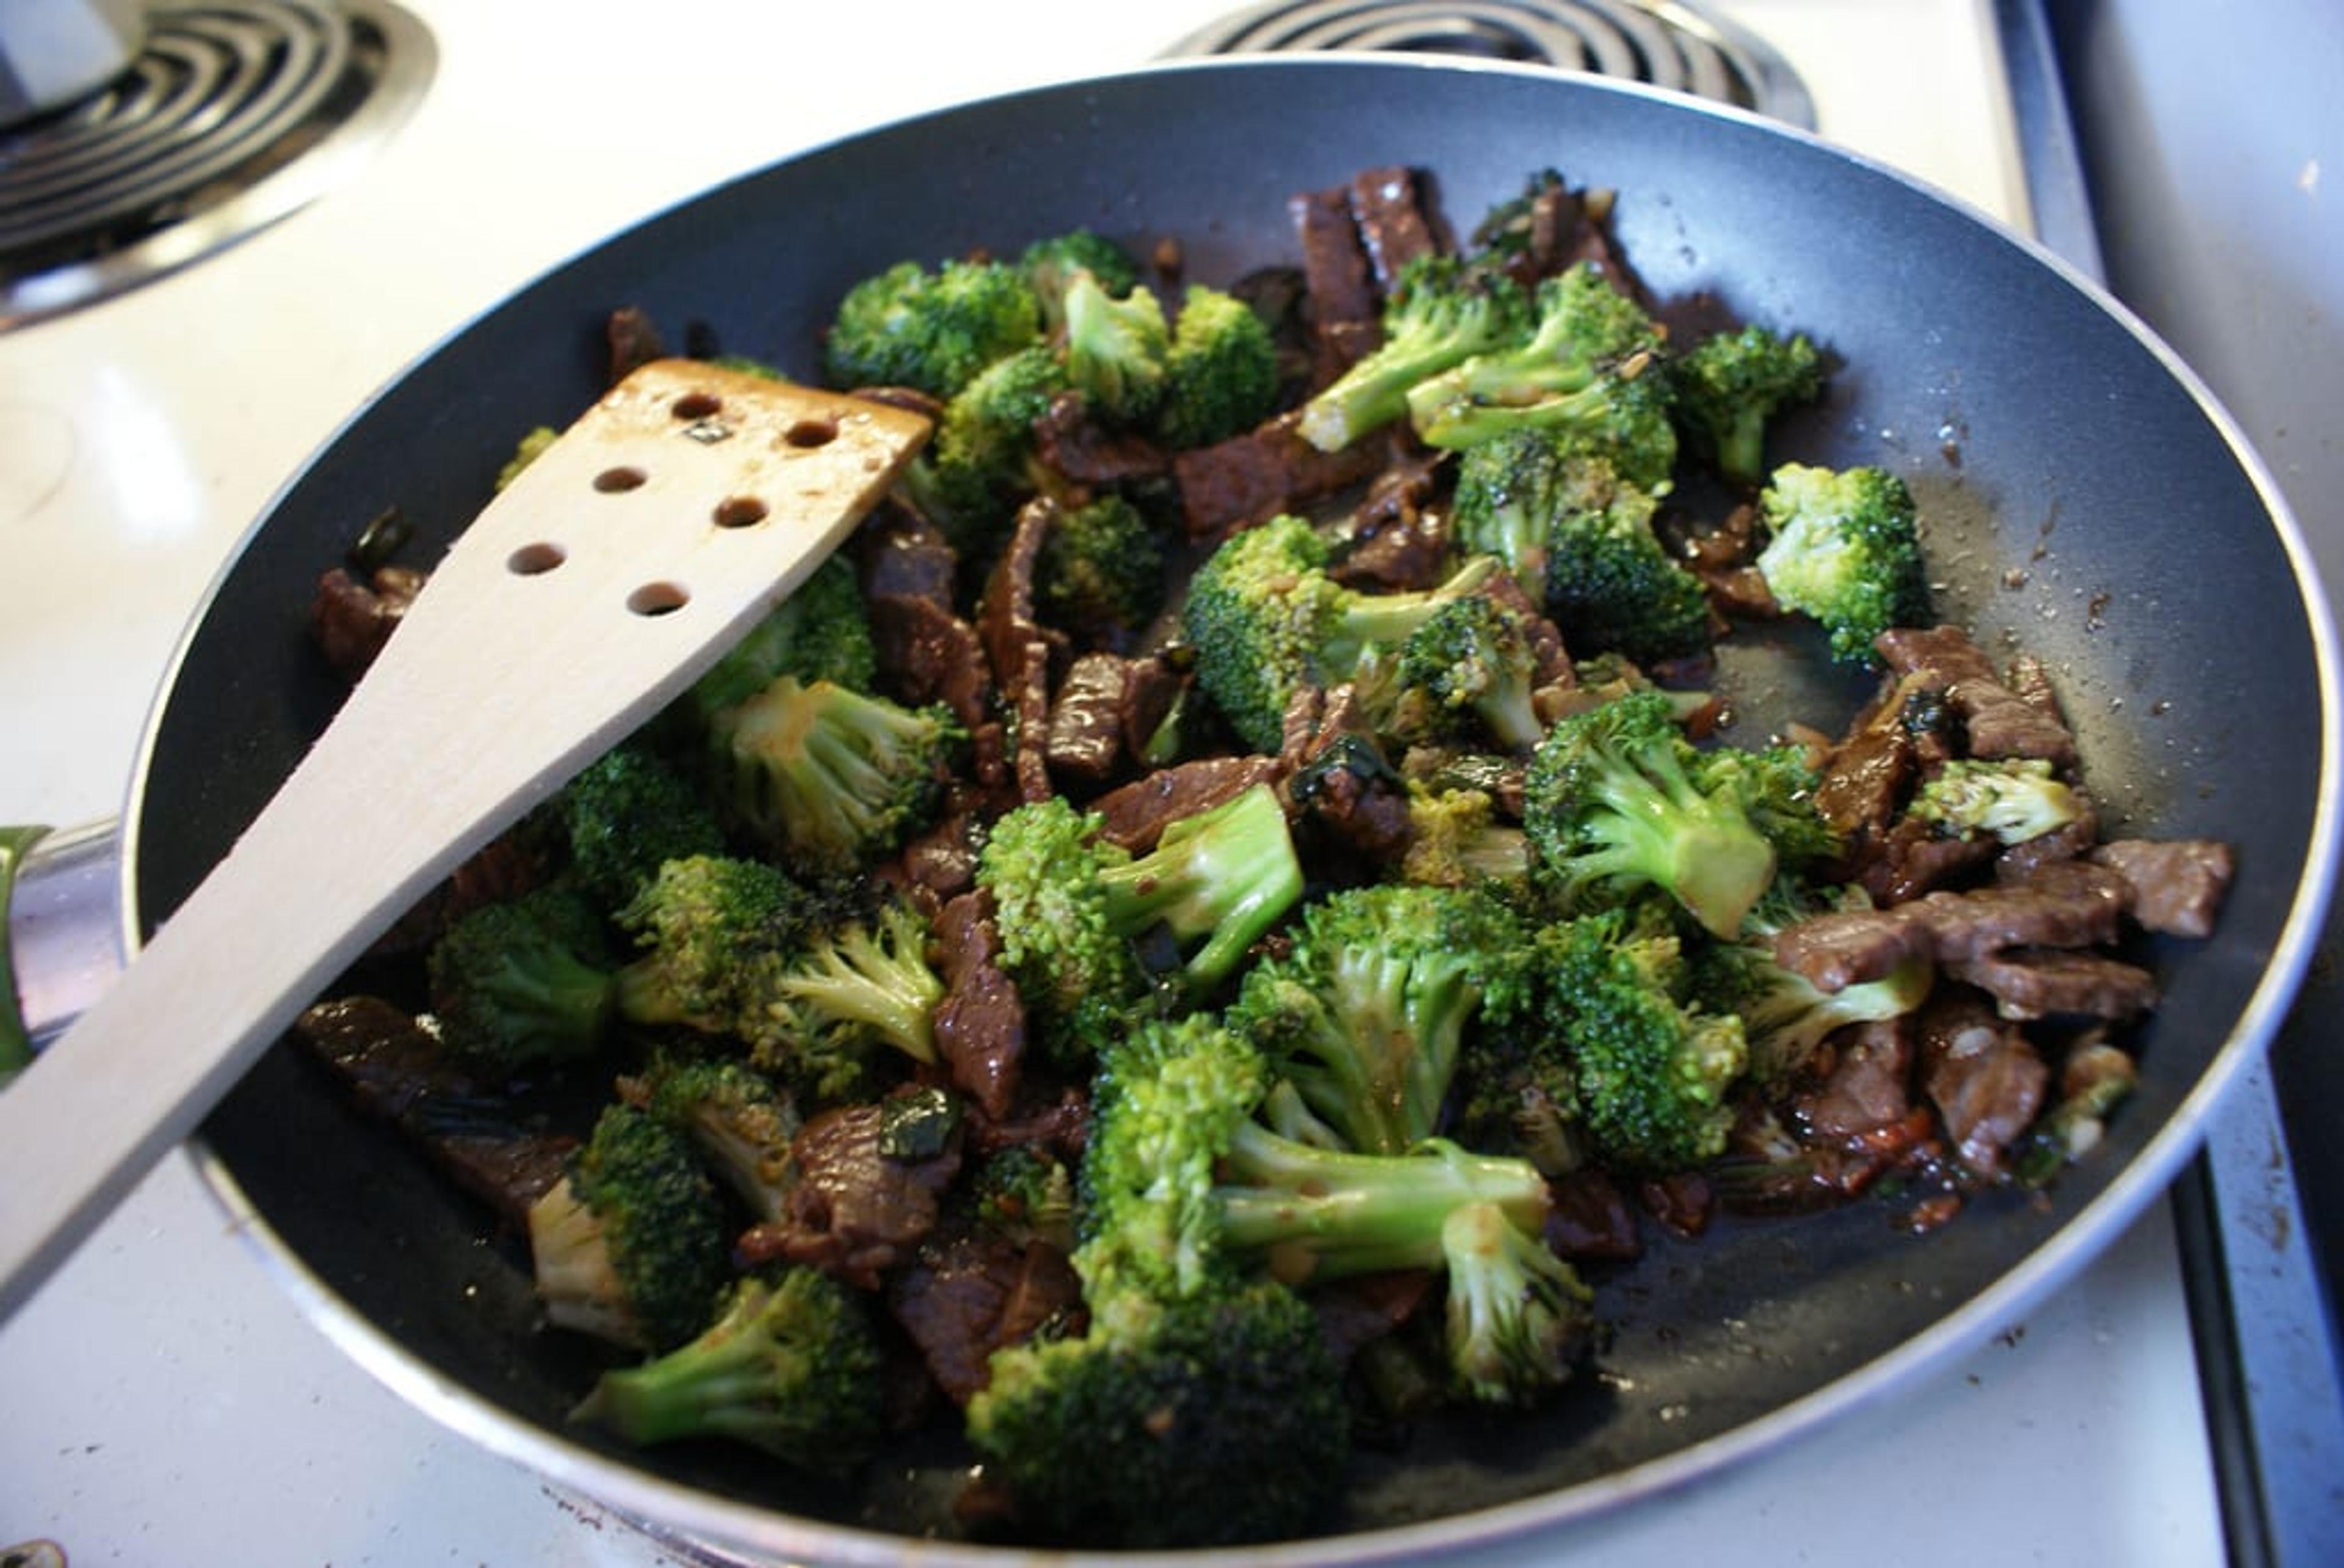 Beef and broccoli in a pan